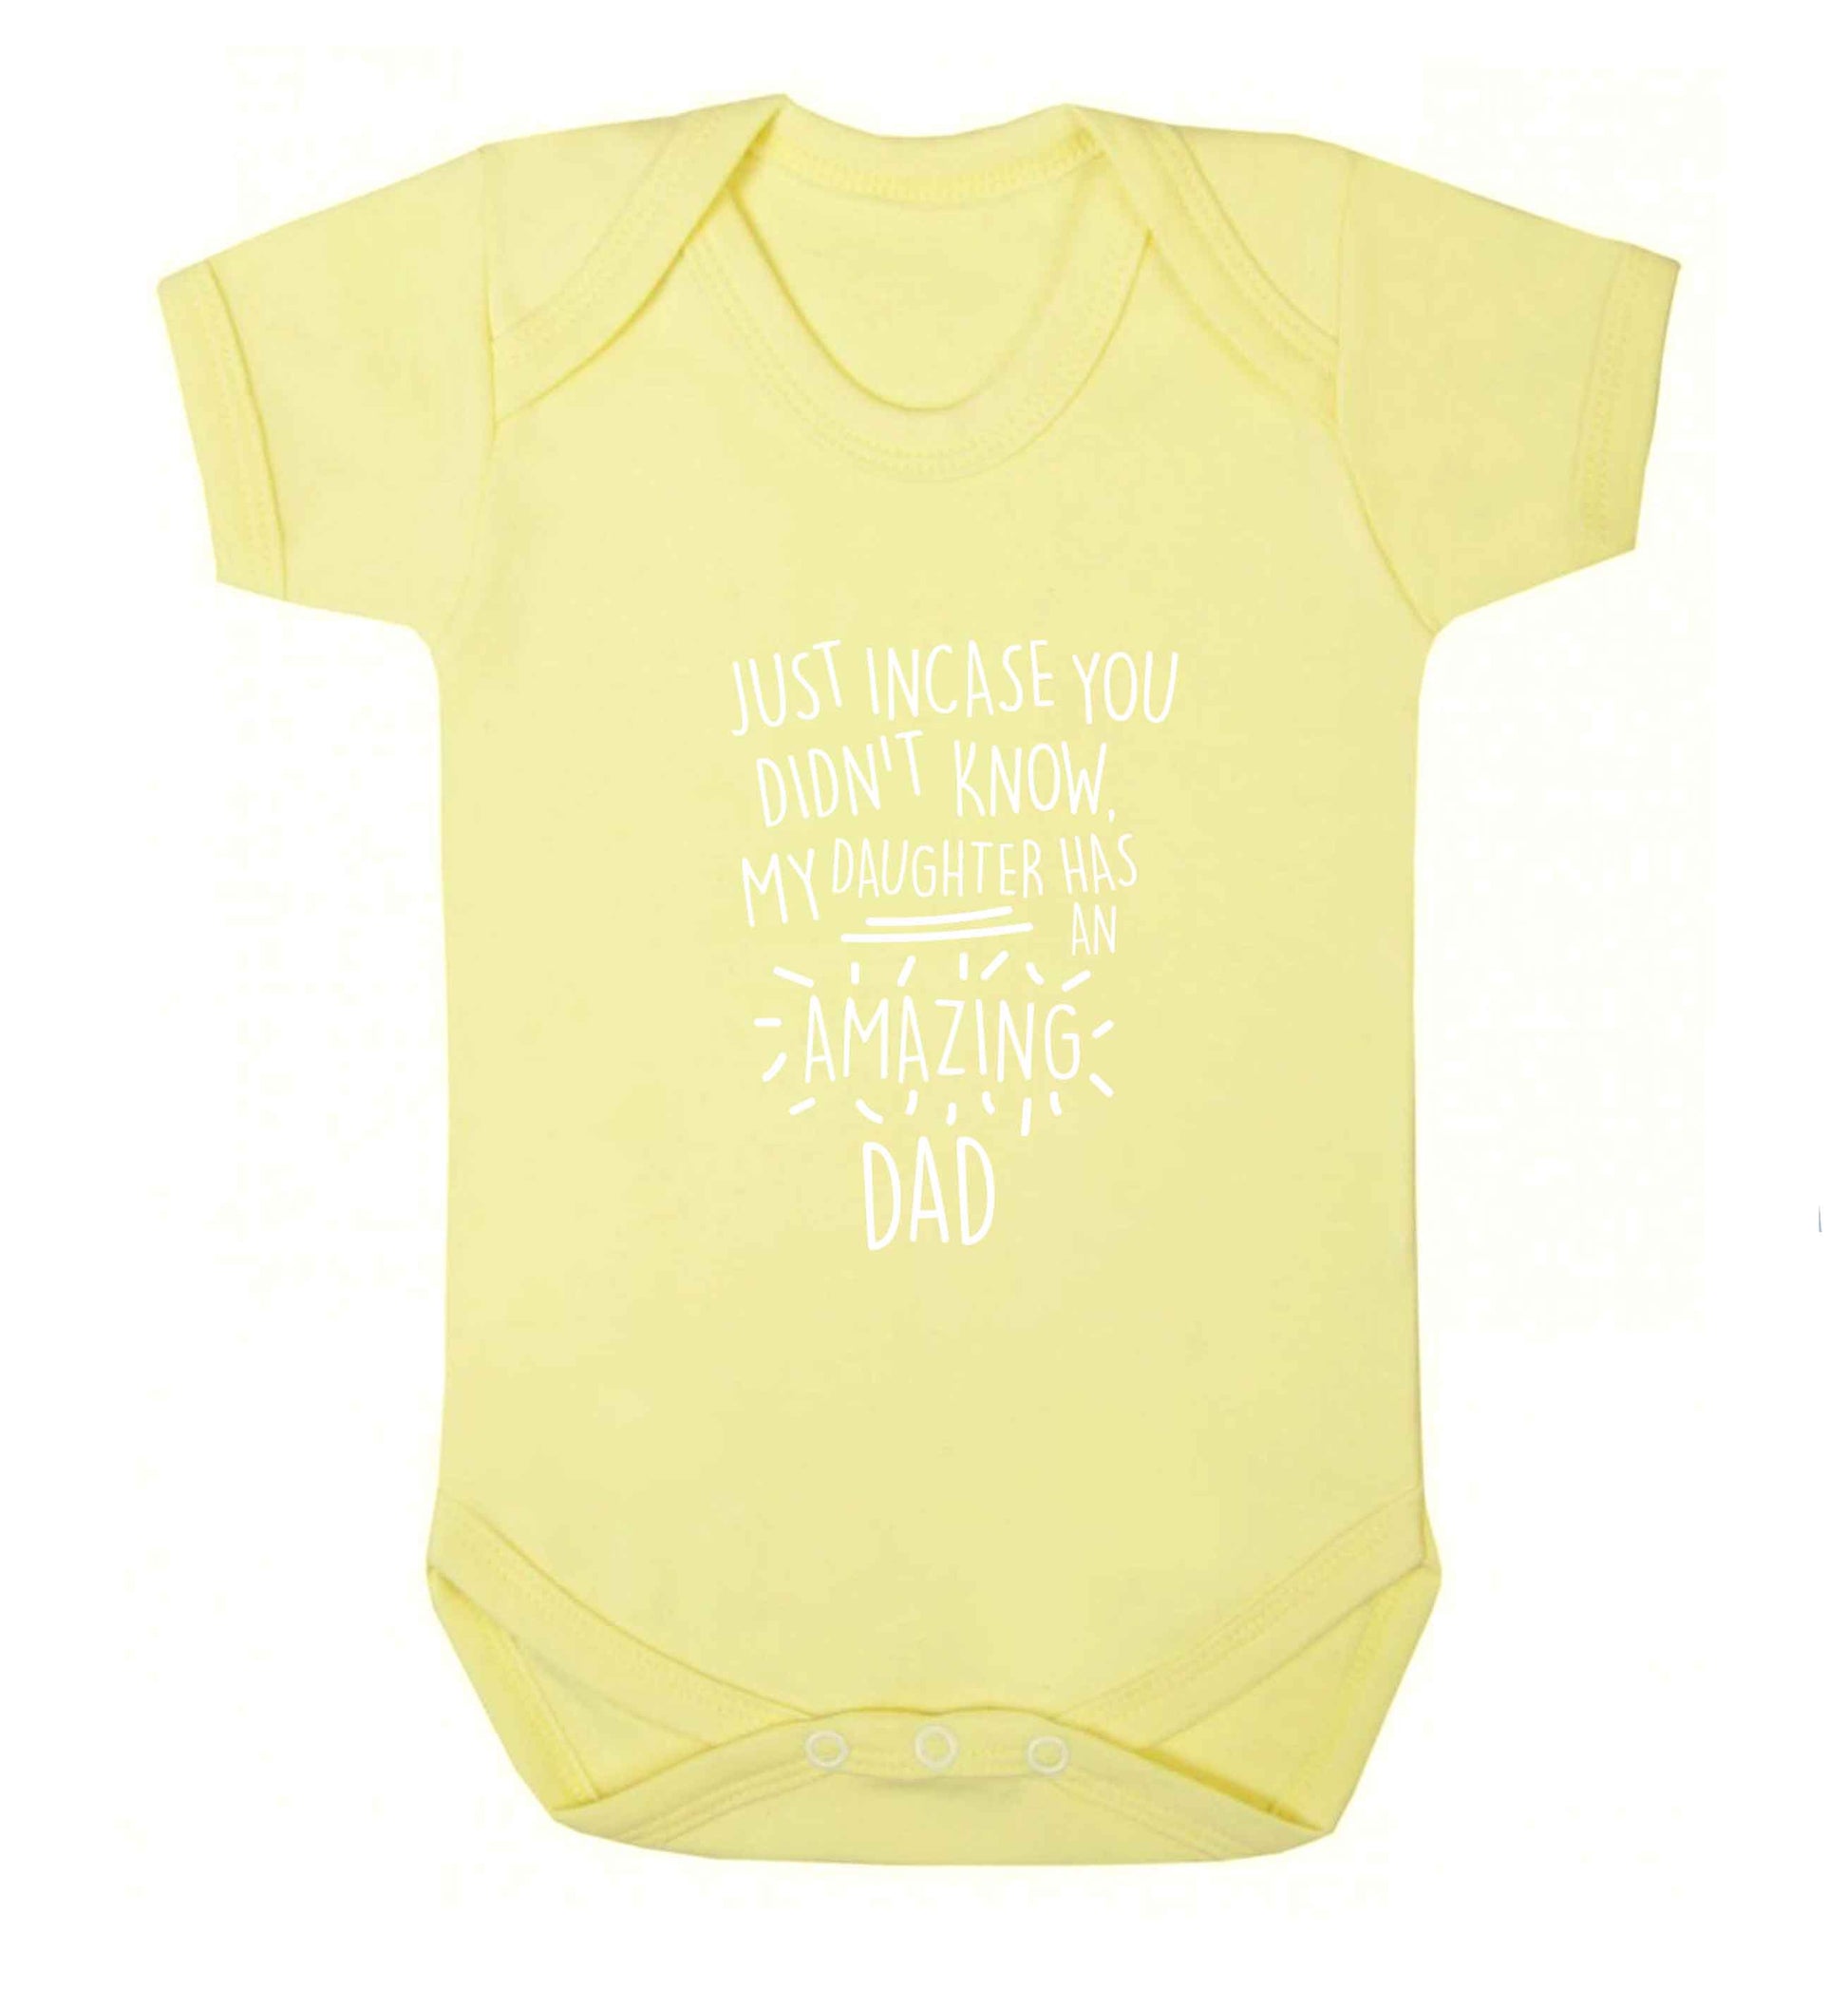 Just incase you didn't know my daughter has an amazing dad baby vest pale yellow 18-24 months